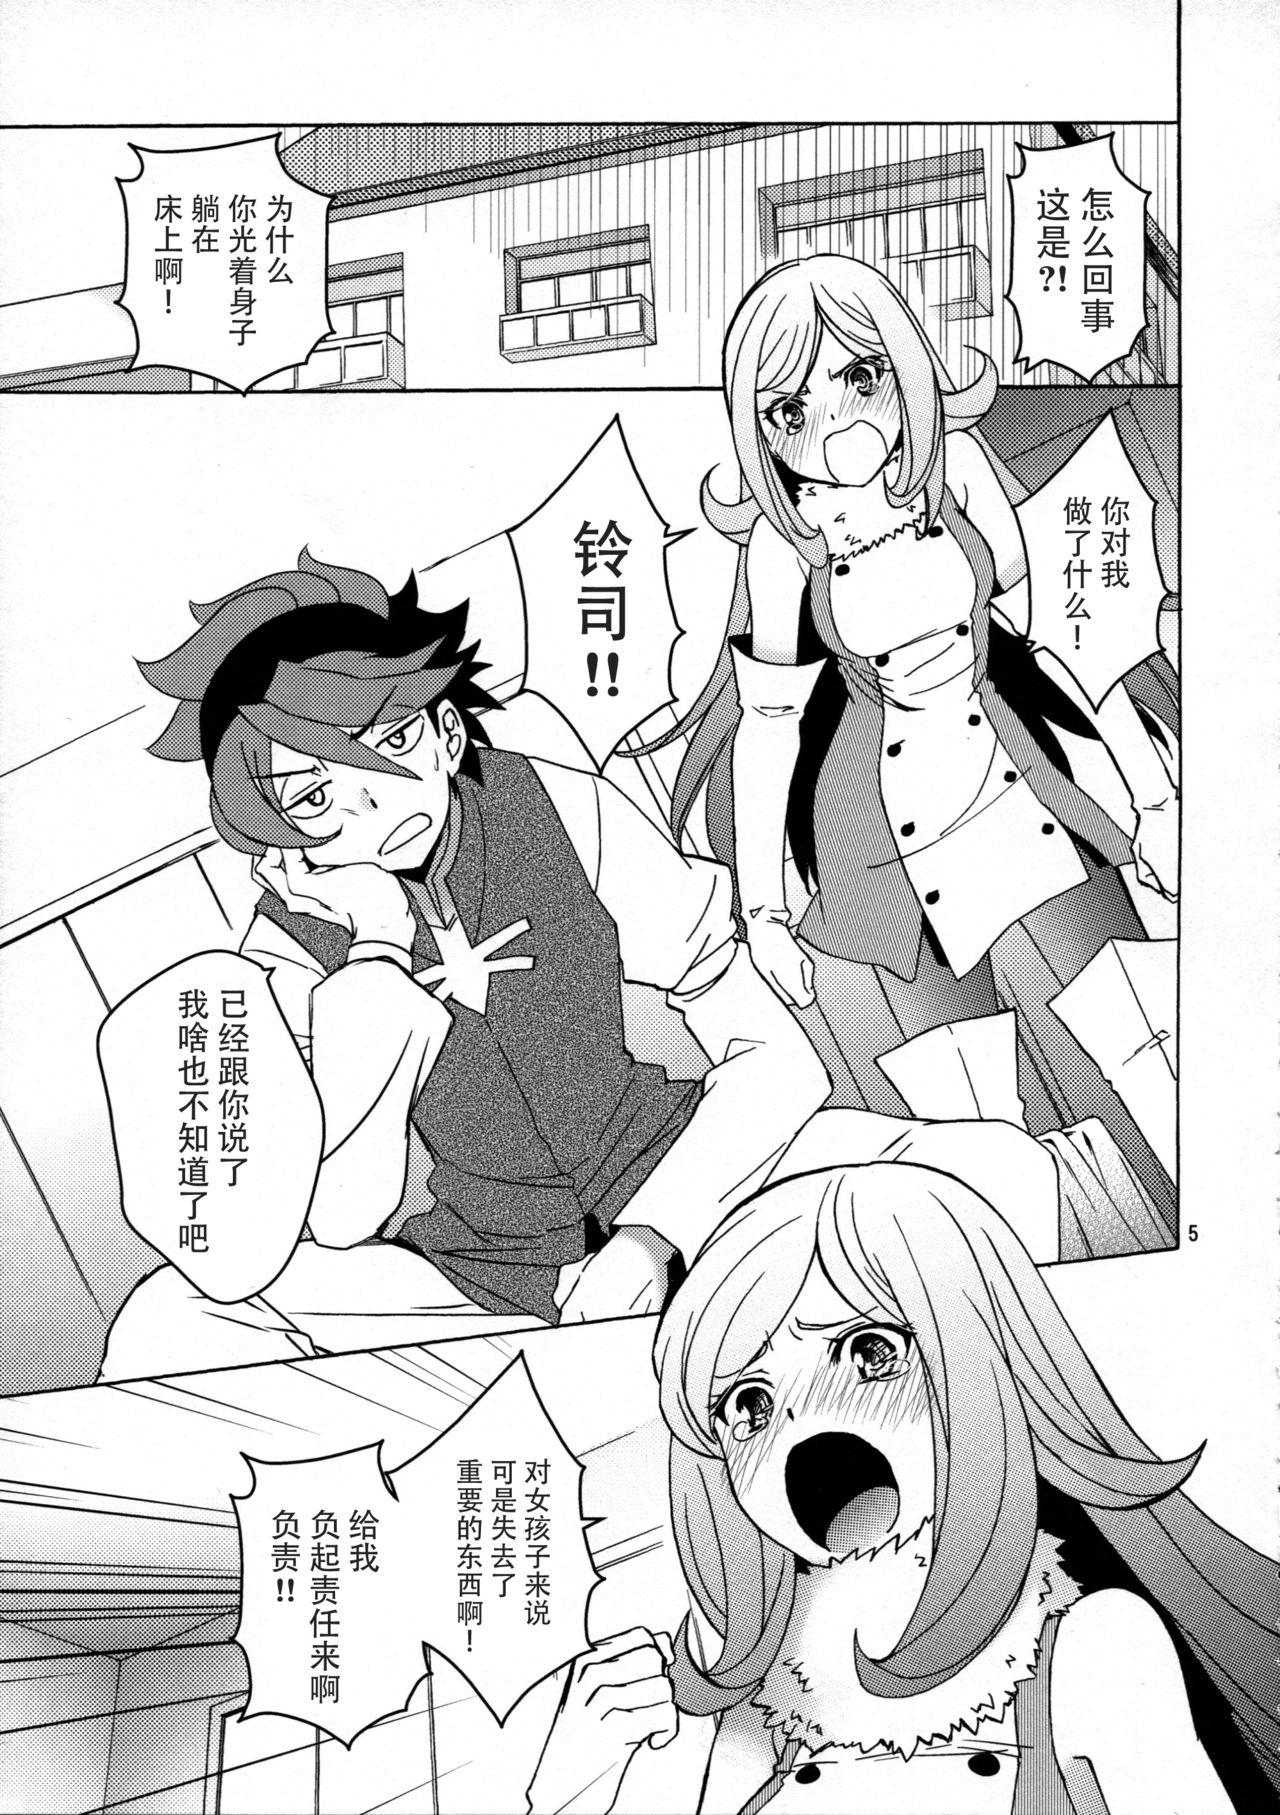 Mask Rei x Ai - Gundam build fighters She - Page 6